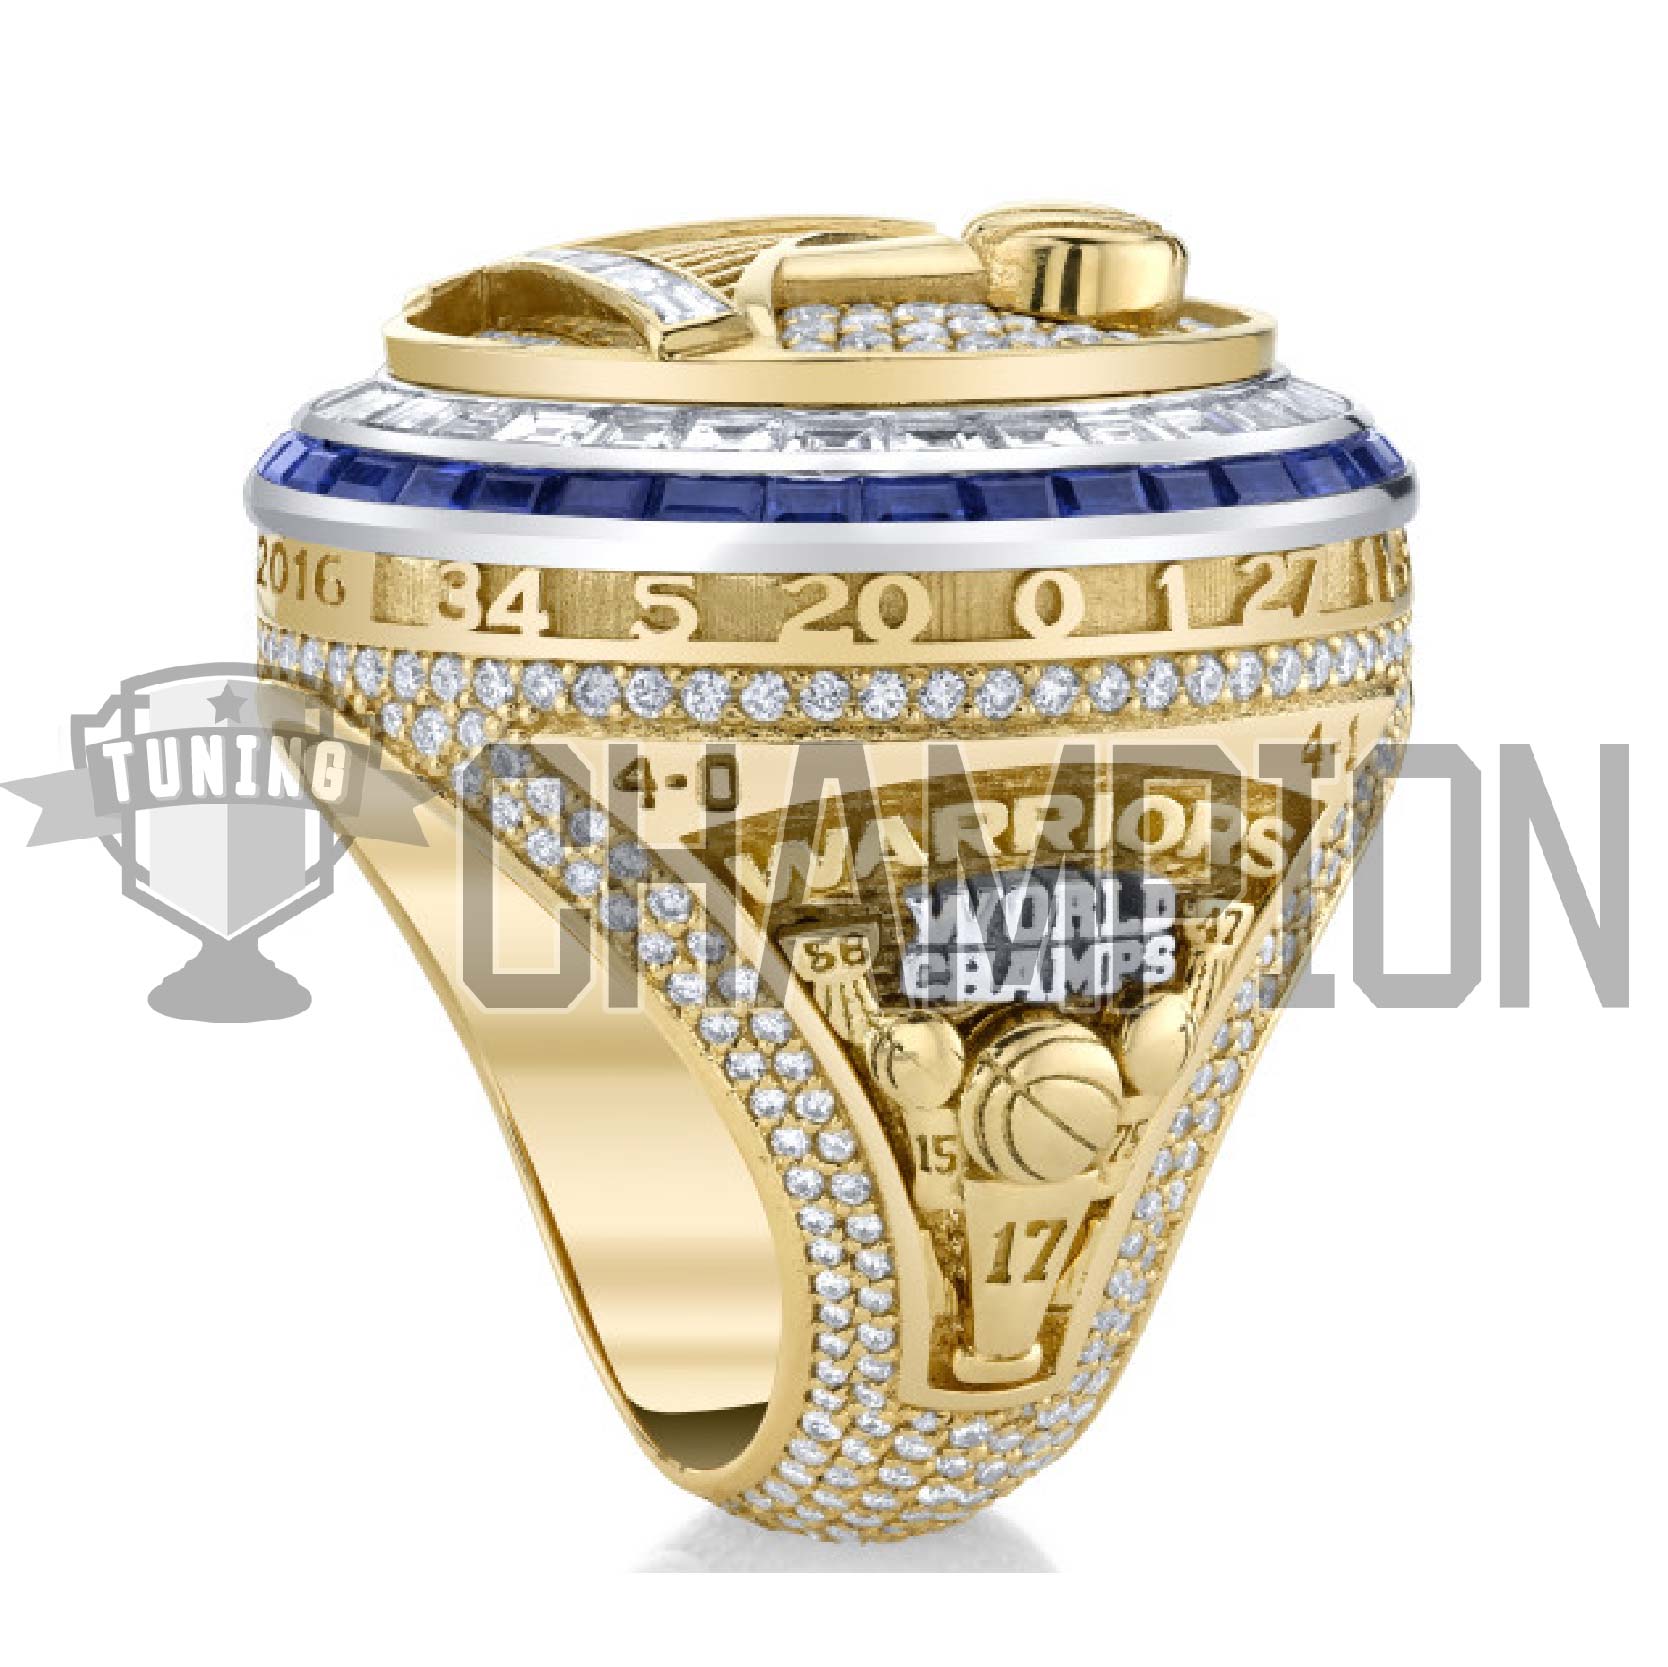 2017 GOLDEN STATE WARRIORS CHAMPIONSHIP RING Personalized league rings